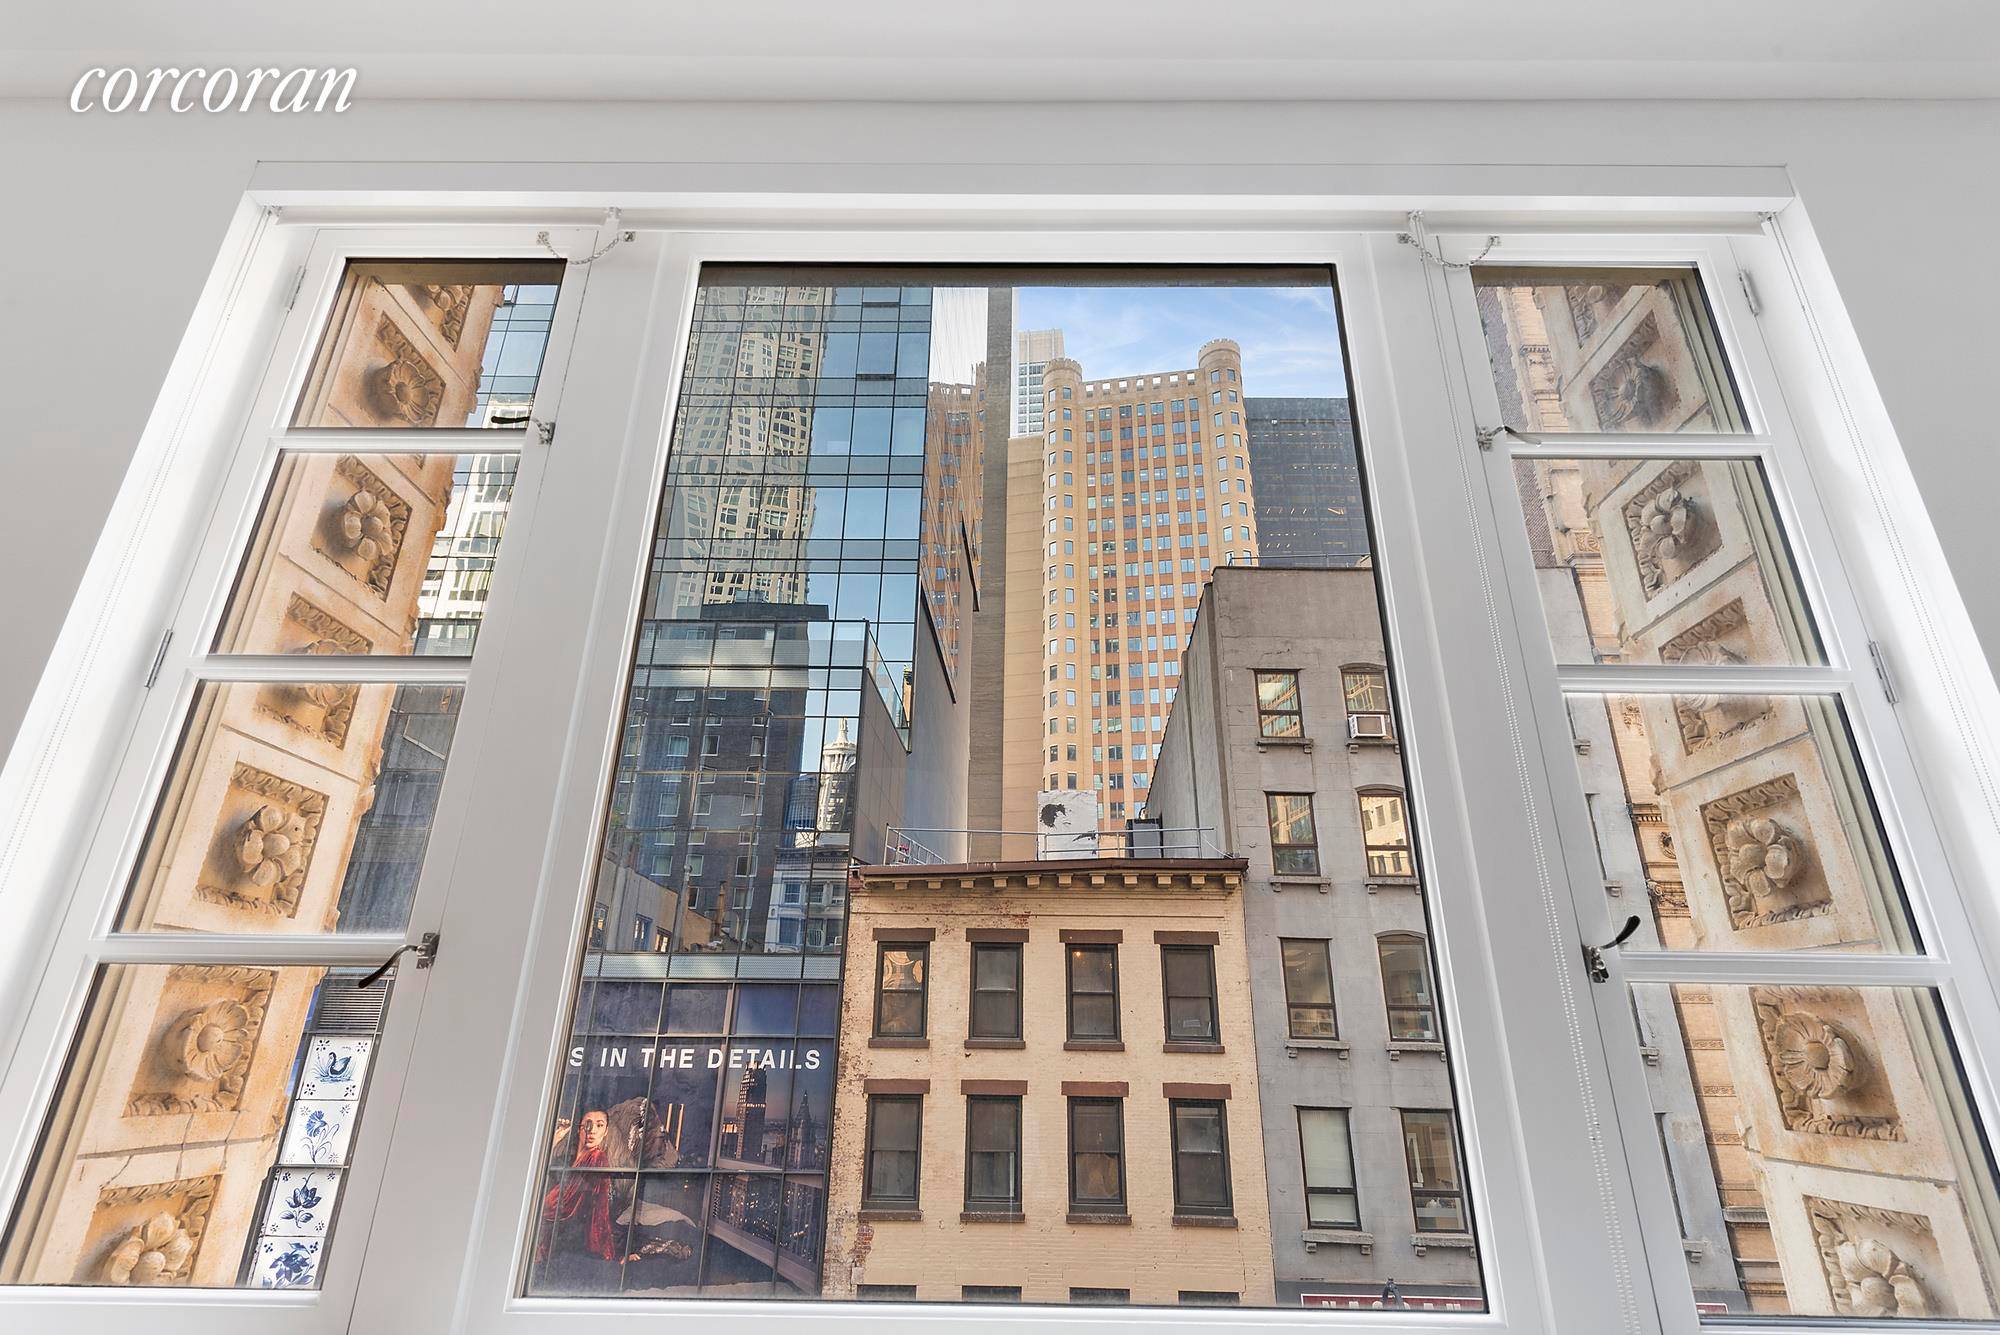 Designed by Studio DB, this exquisite full floor loft features grand proportions, two bedrooms plus den or home office, three full bathrooms and flawless designer finishes in a landmarked architectural ...